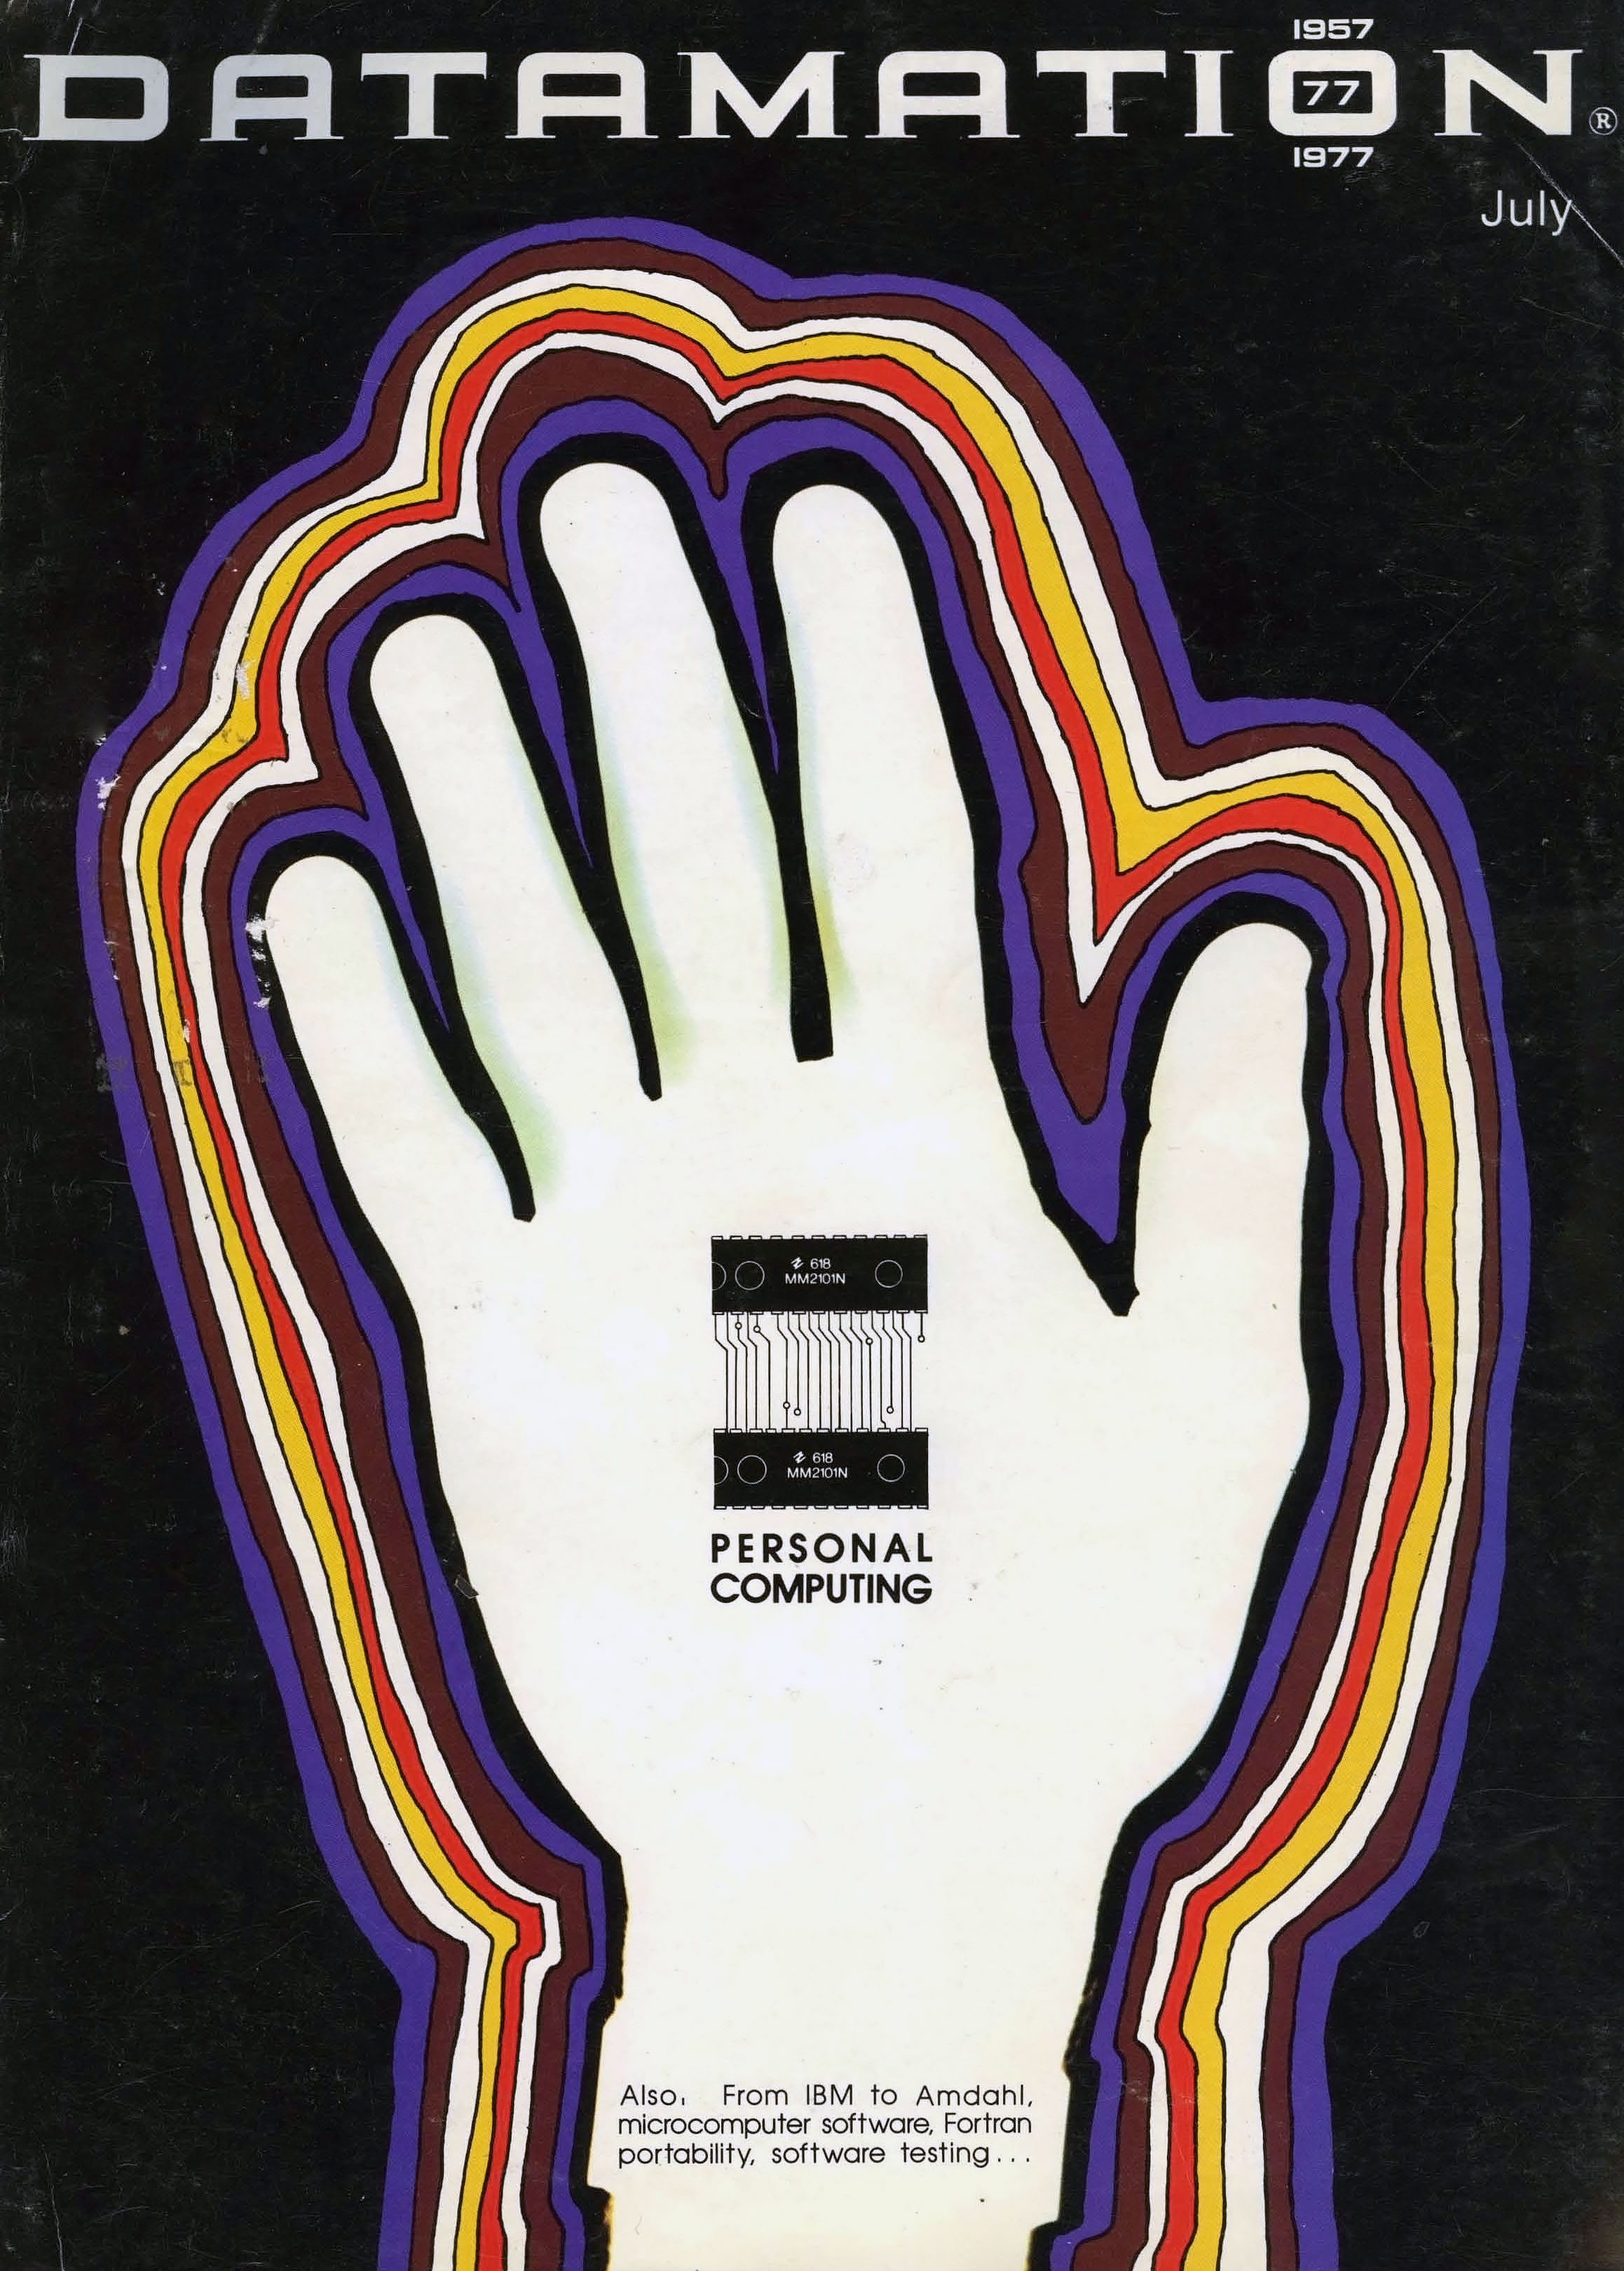  Datamation, Cover for the "Personal Computing" issue